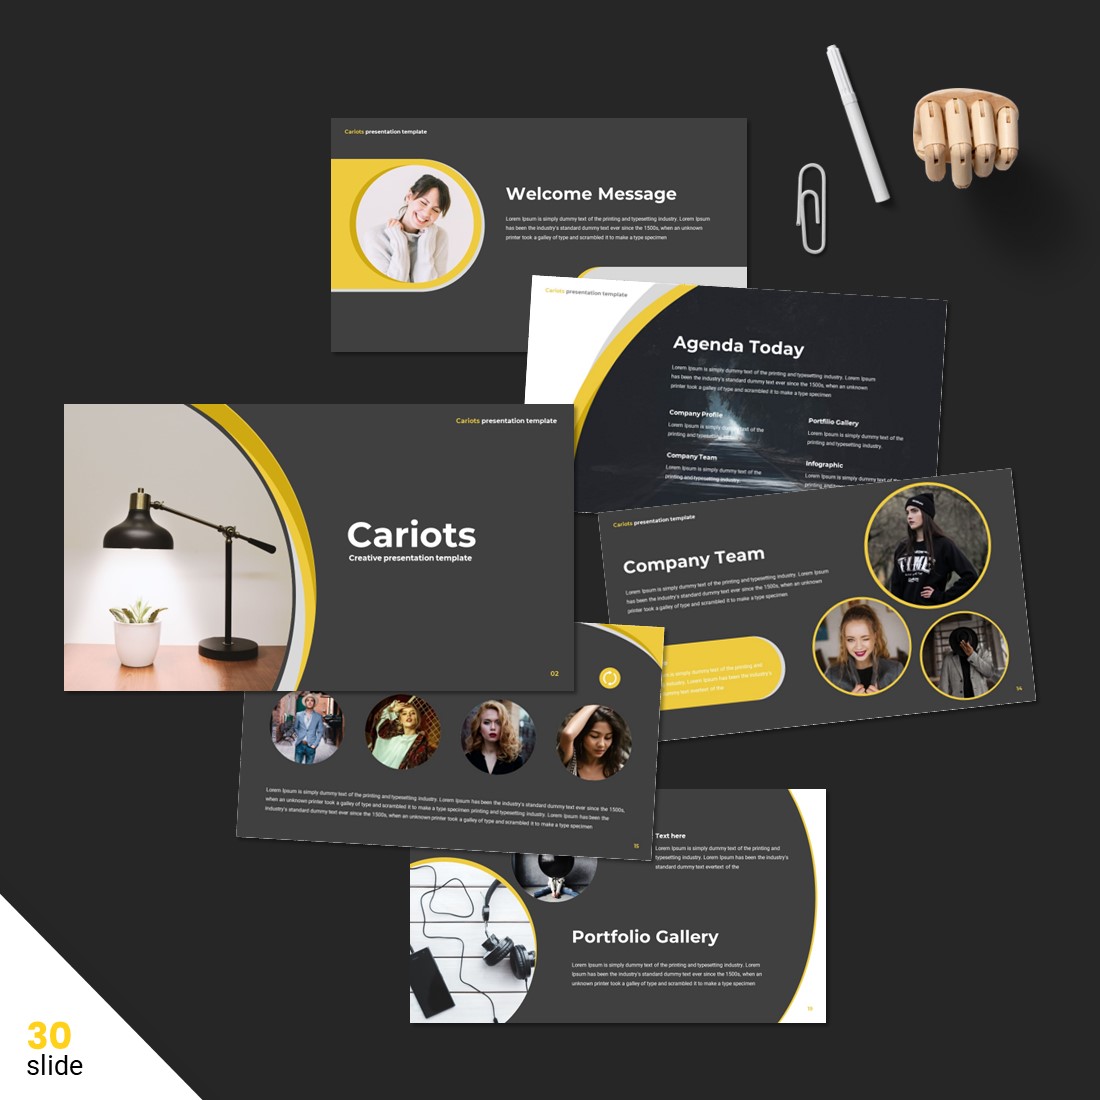 Cariots Powerpoint Presentation Template cover image.